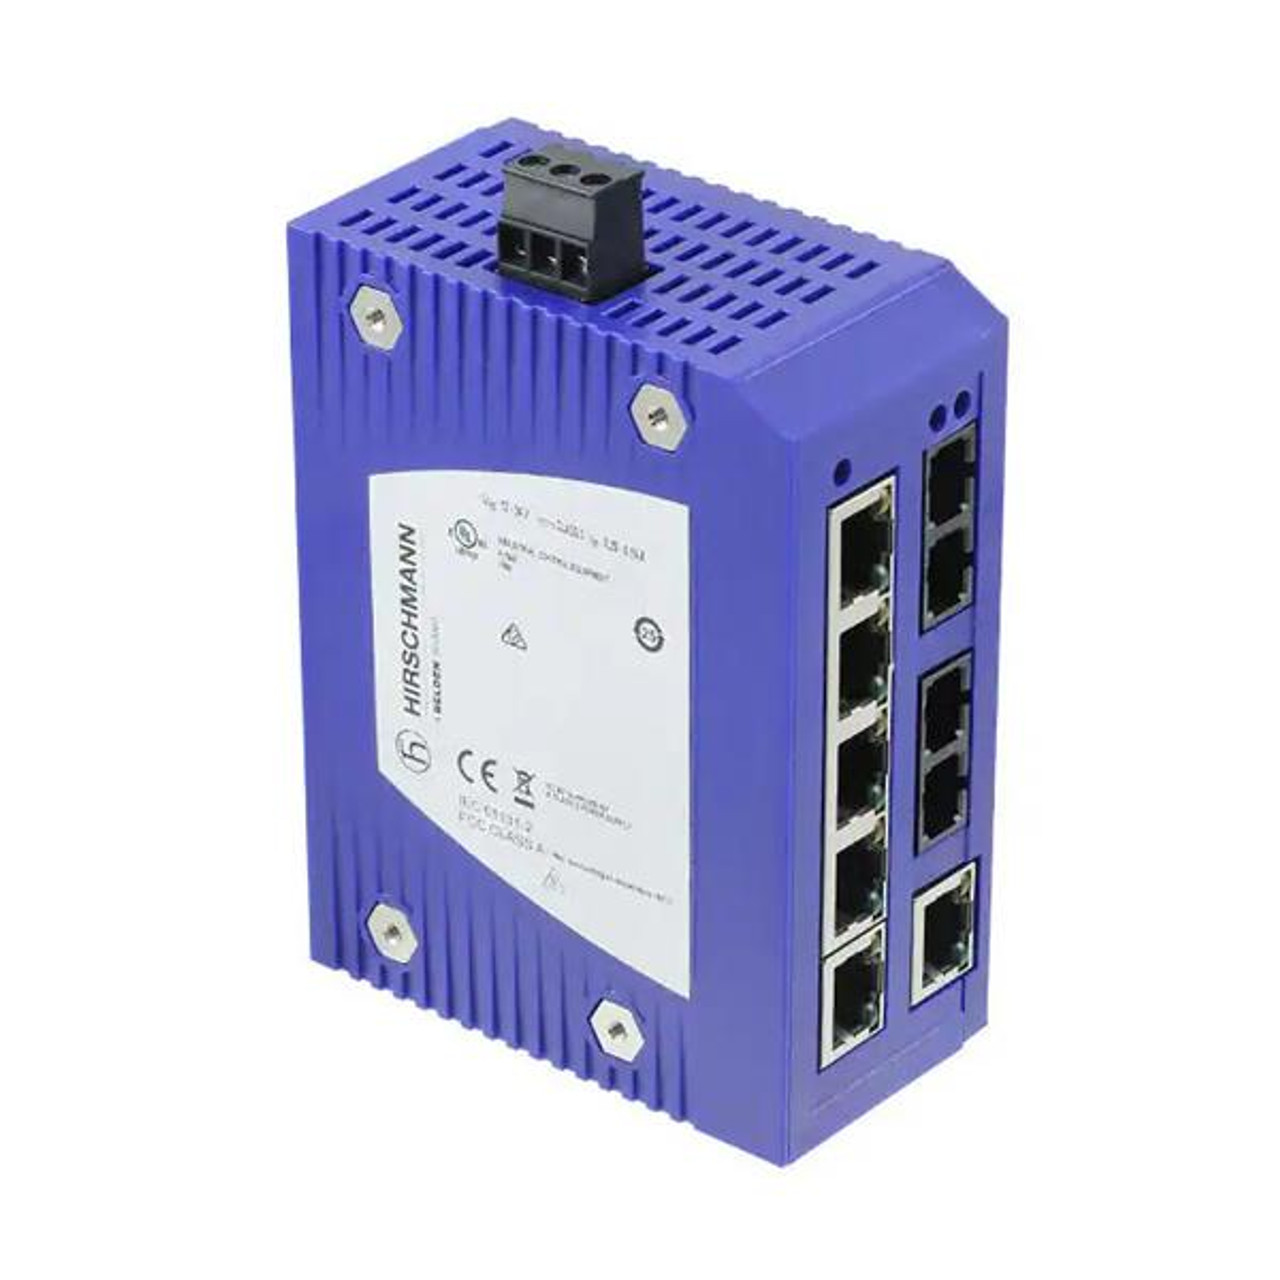 Hirschmann Unmanaged Industrial Ethernet Rail Switch 10/100 Mbit/s Ethernet 6 x 10/100BASE-TX 1 x 100BASE-FX MM cable SC sockets (Refurbished)